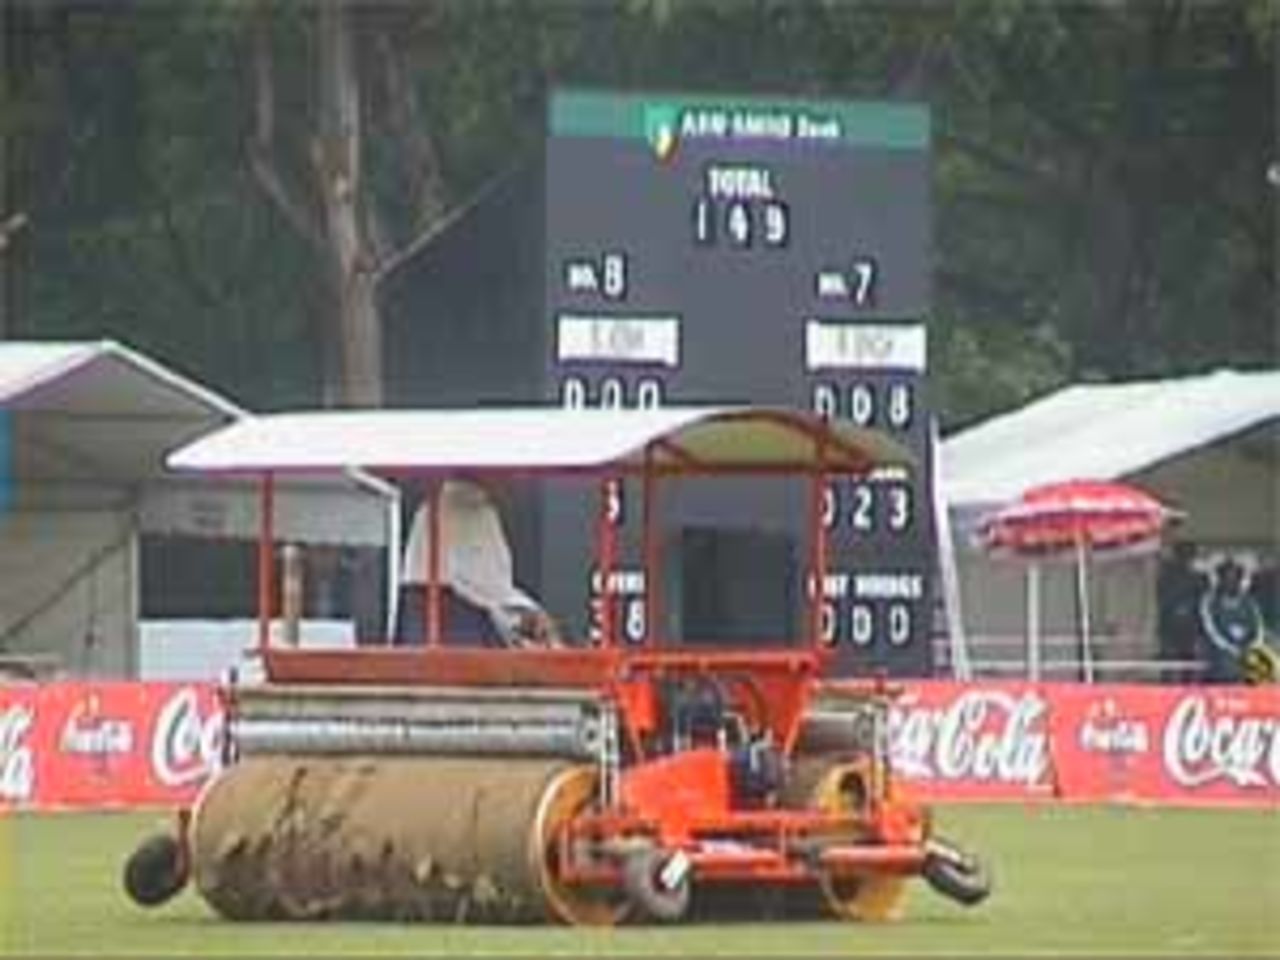 The super sopper tries to mop up the soggy out field, India v West Indies (Final), Coca-Cola Singapore Challenge, 1999-2000, Kallang Ground, Singapore, 7 Sep 1999.